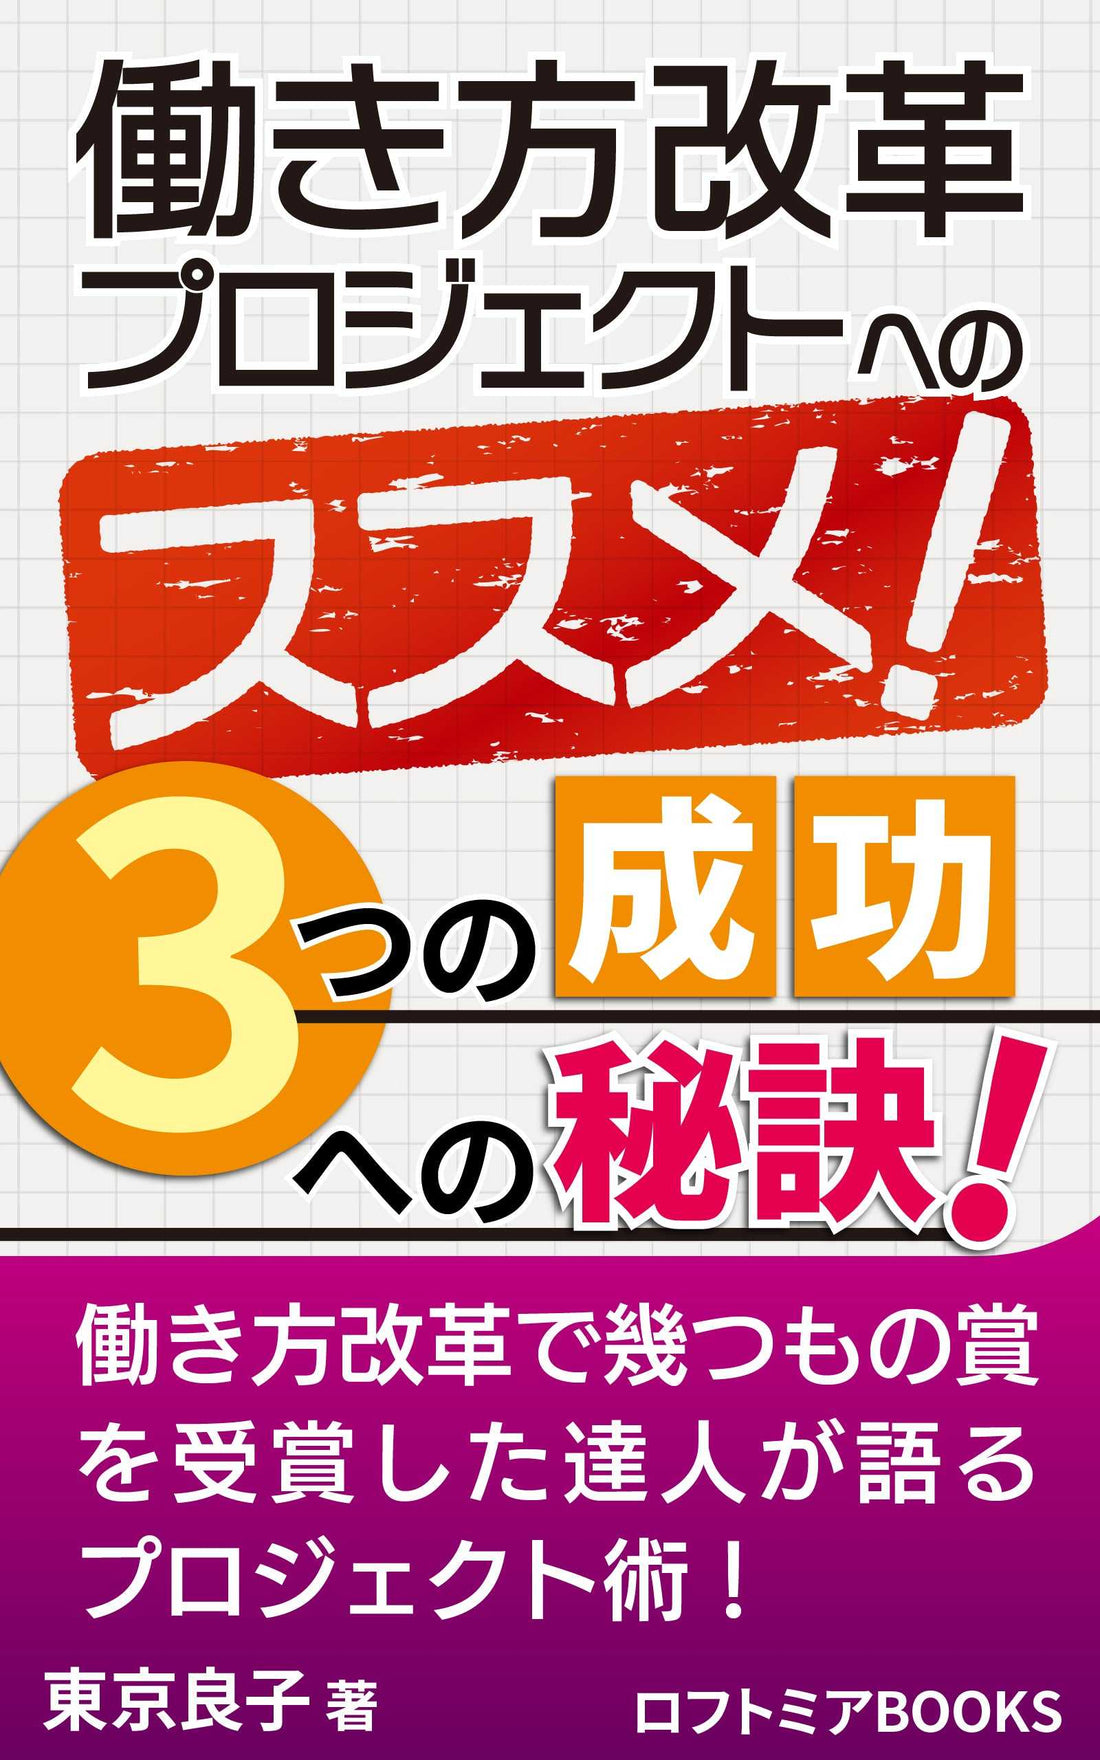 A free gift of a work-style reform ebook from the 15th | Trendy Japan